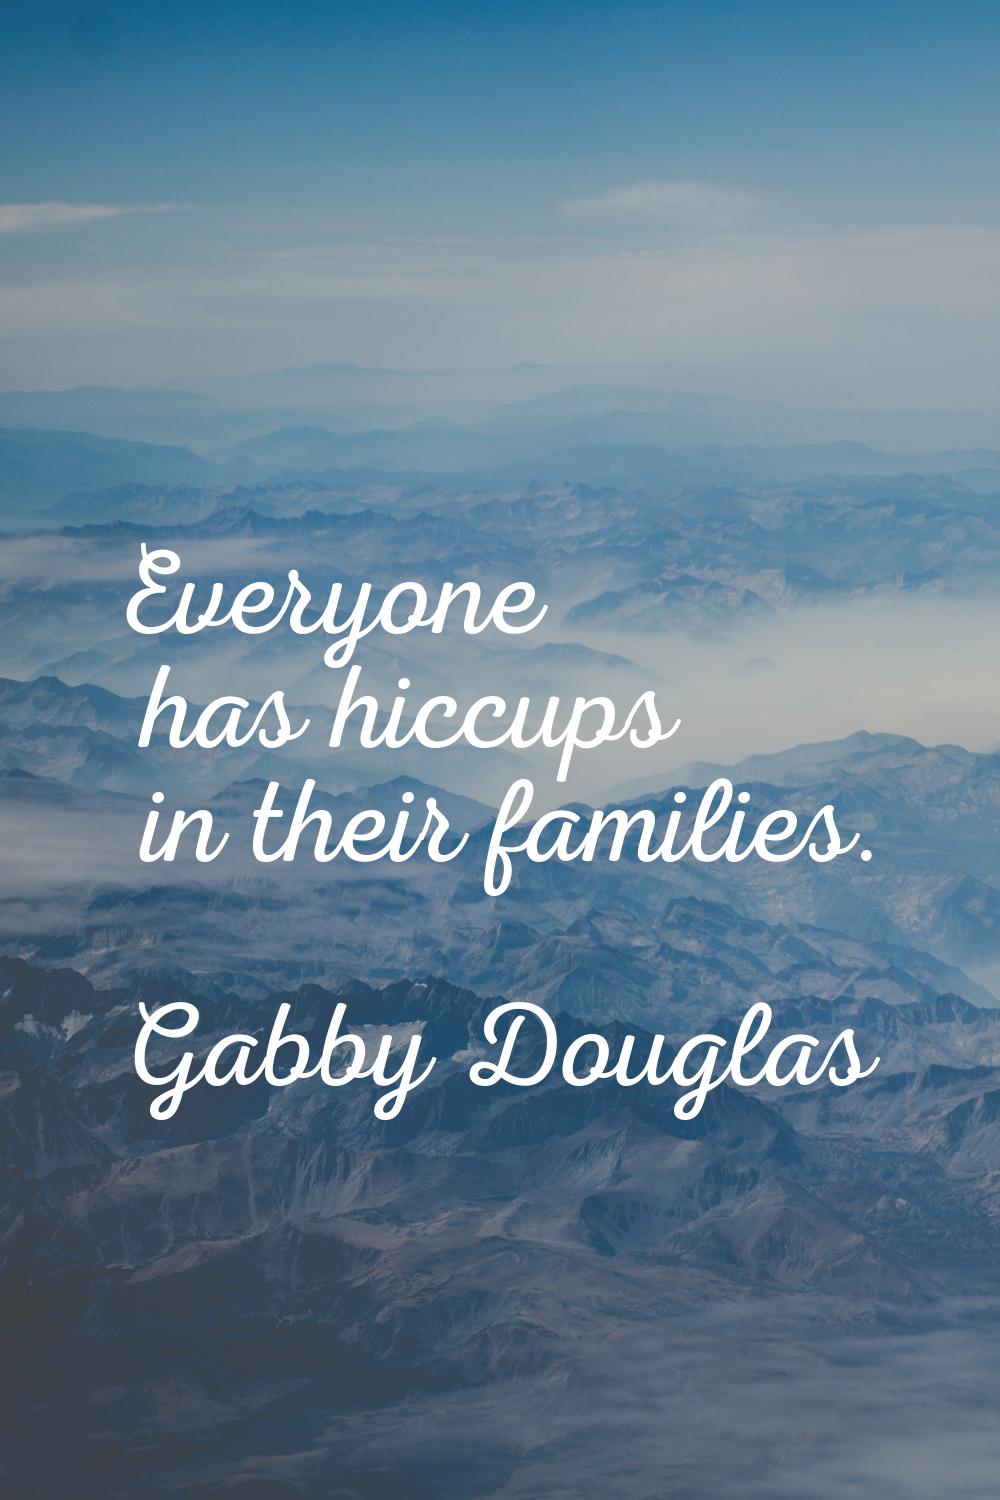 Everyone has hiccups in their families.